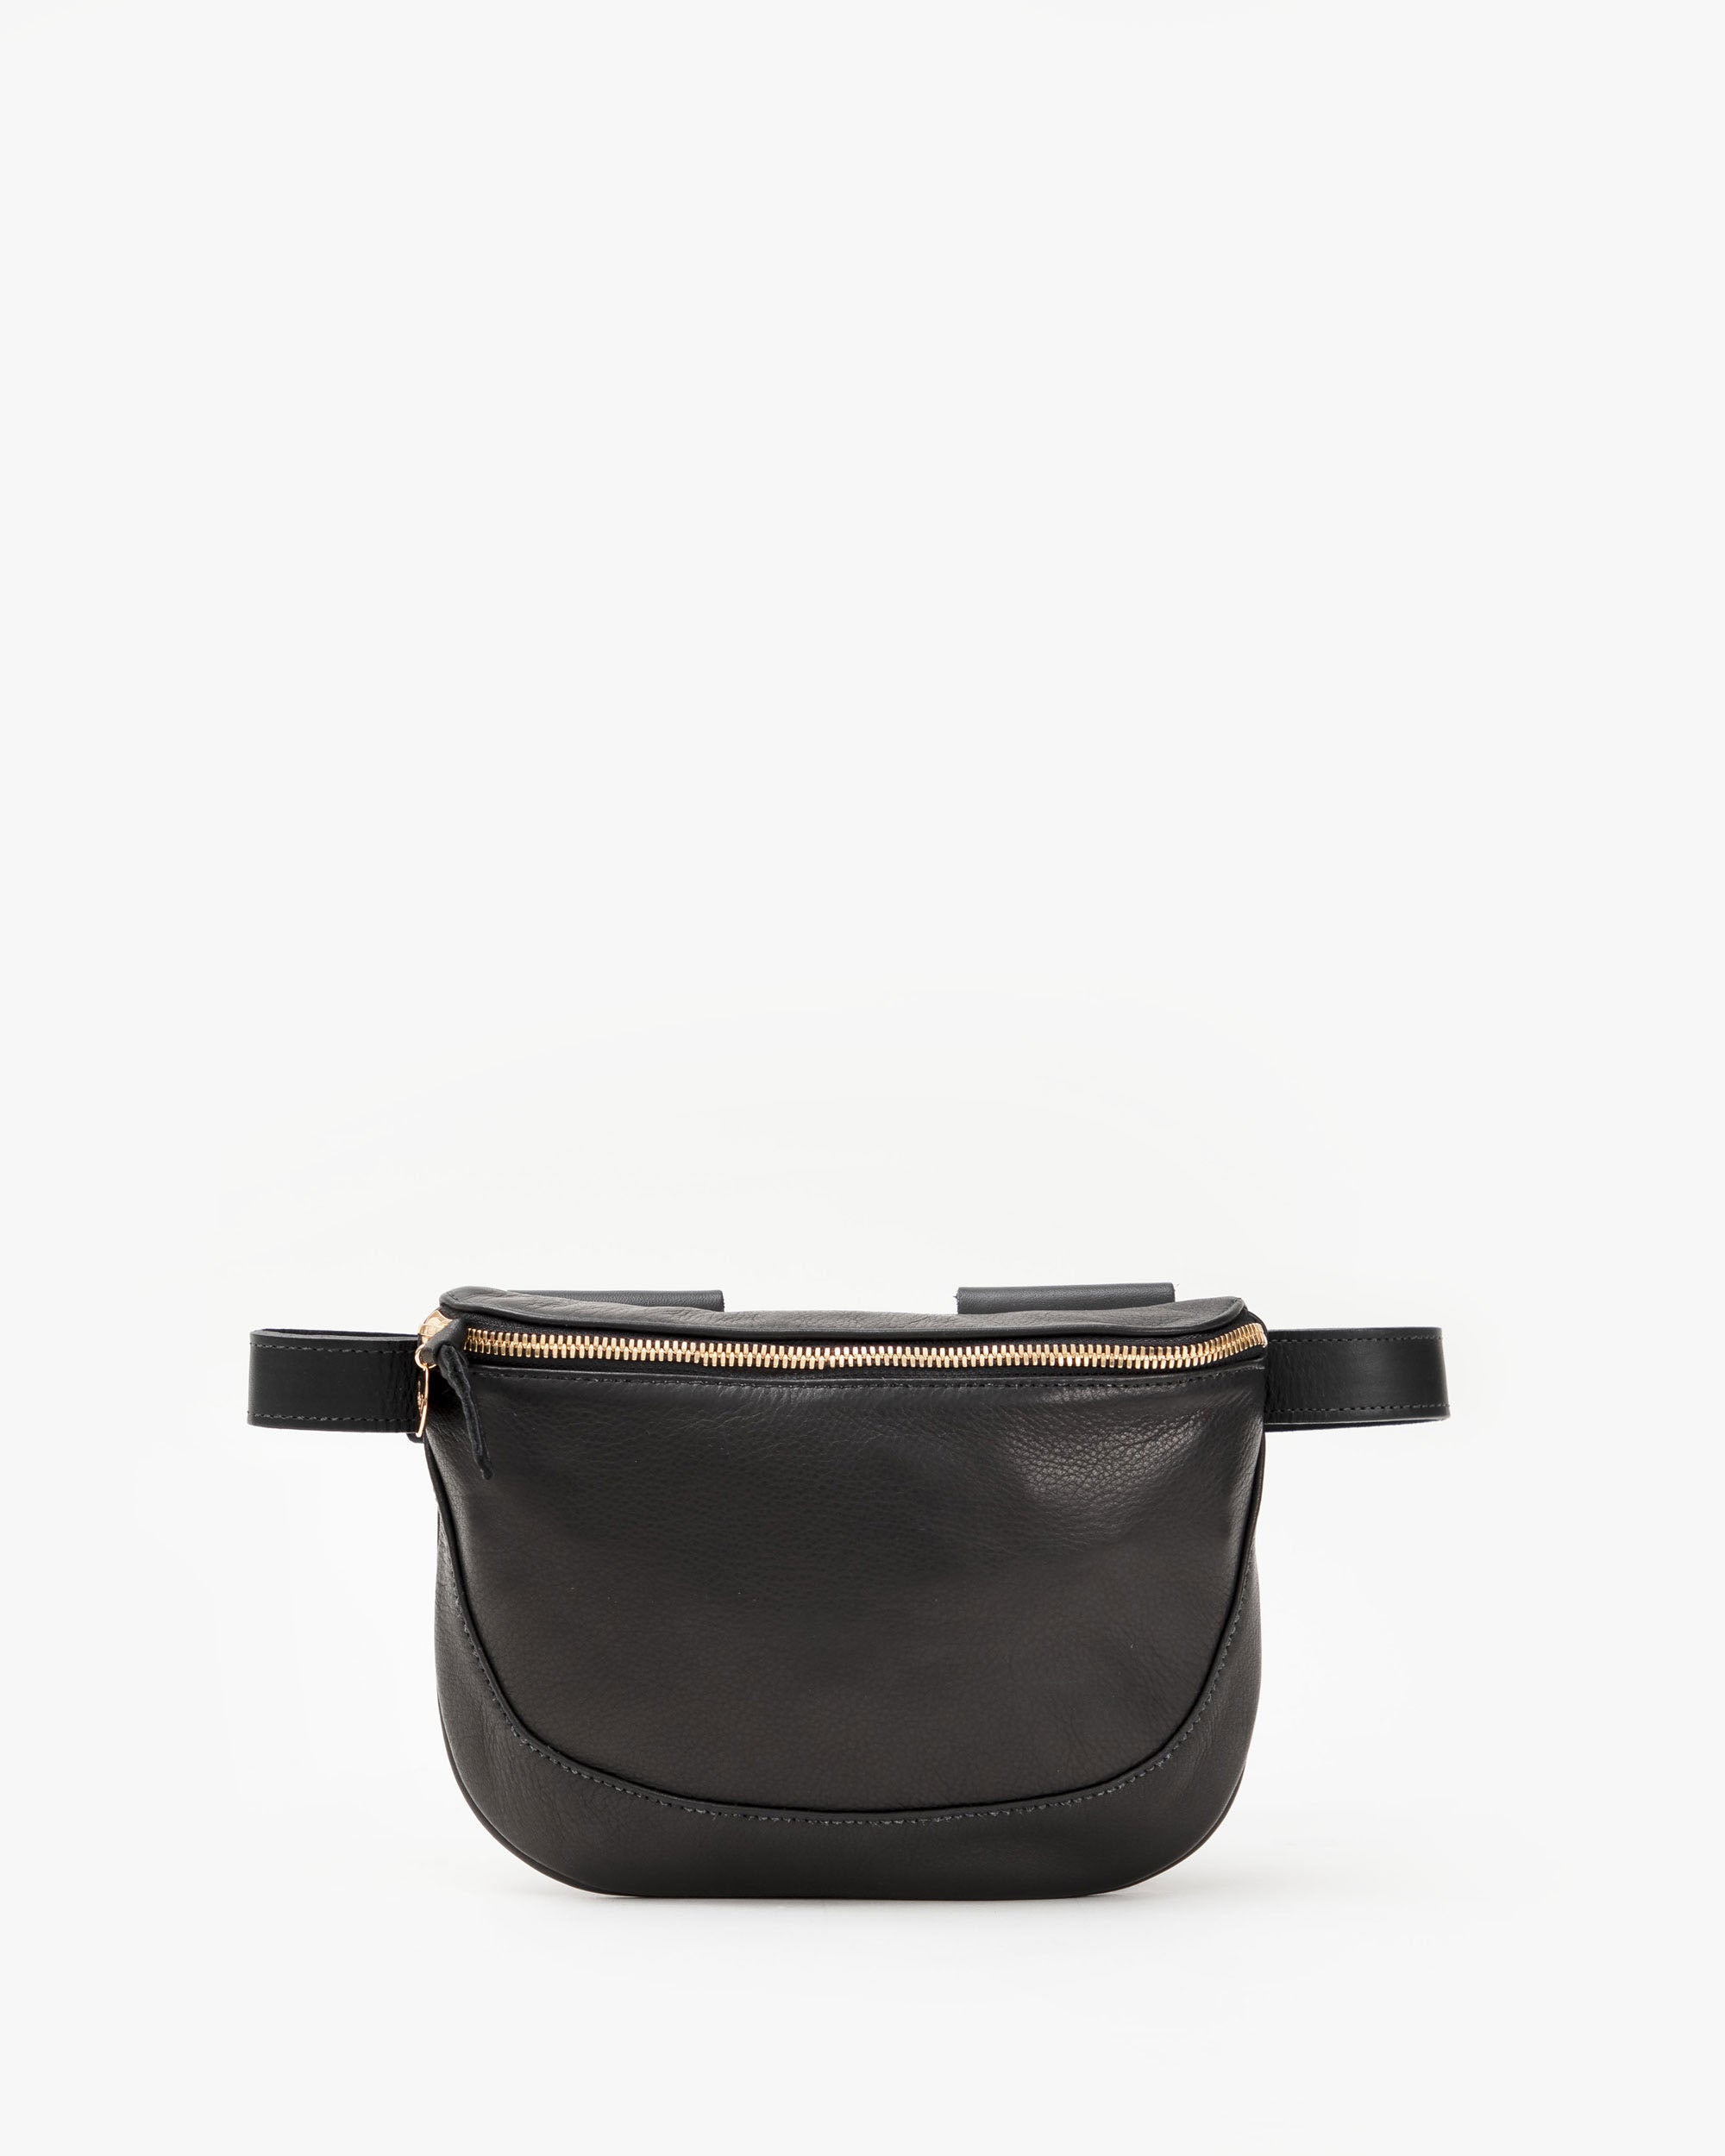 Black Fanny Pack for Women.leather Crossbody Fanny Pack 